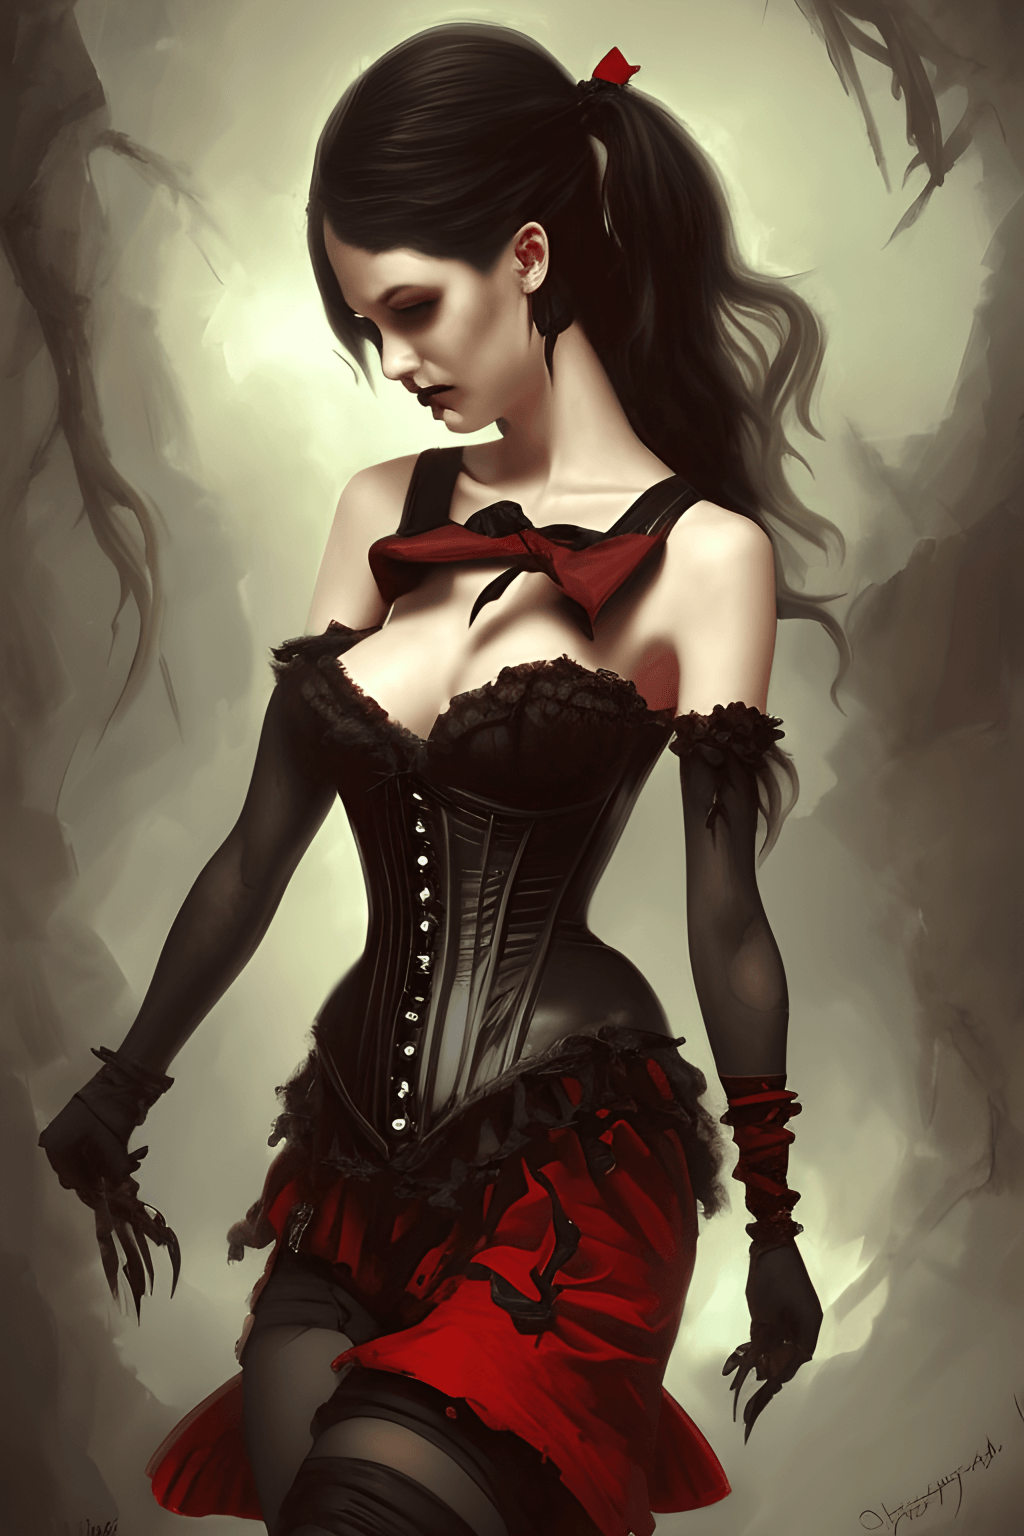 https://www.creativefabrica.com/wp-content/uploads/2022/11/23/Gothic-Girl-With-Red-Corset-And-Pigtails-48081262-1.png